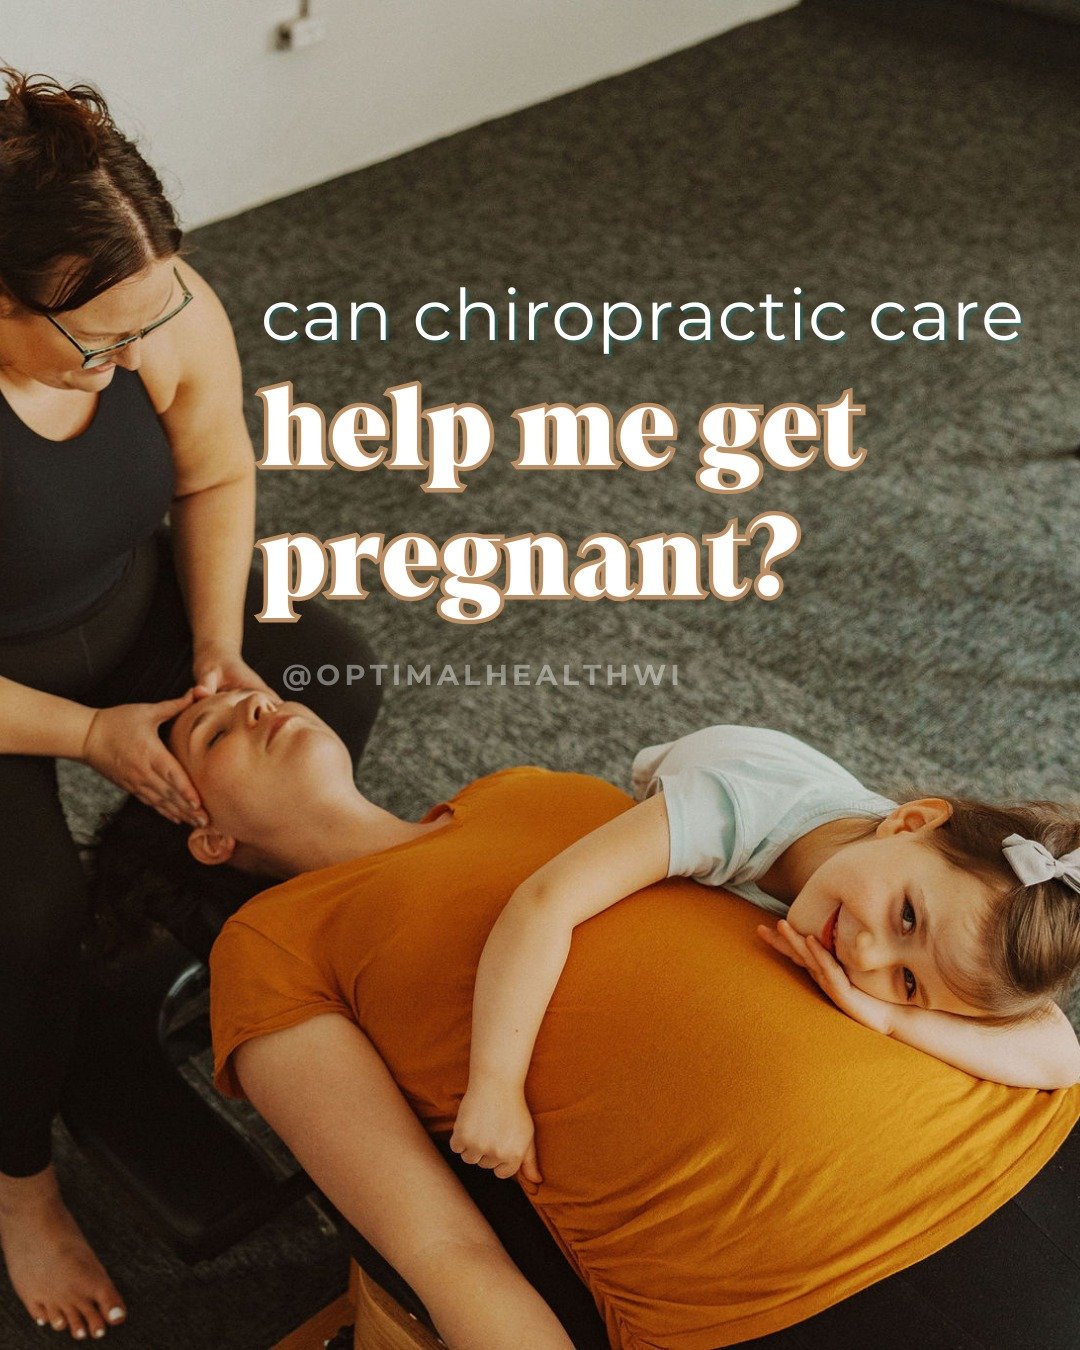 Curious if chiropractic care can support your journey to pregnancy? 🤔 Here's the scoop: while chiropractic isn't a fertility treatment per se, it can play a supportive role by optimizing your body's overall function. By ensuring proper spinal alignm